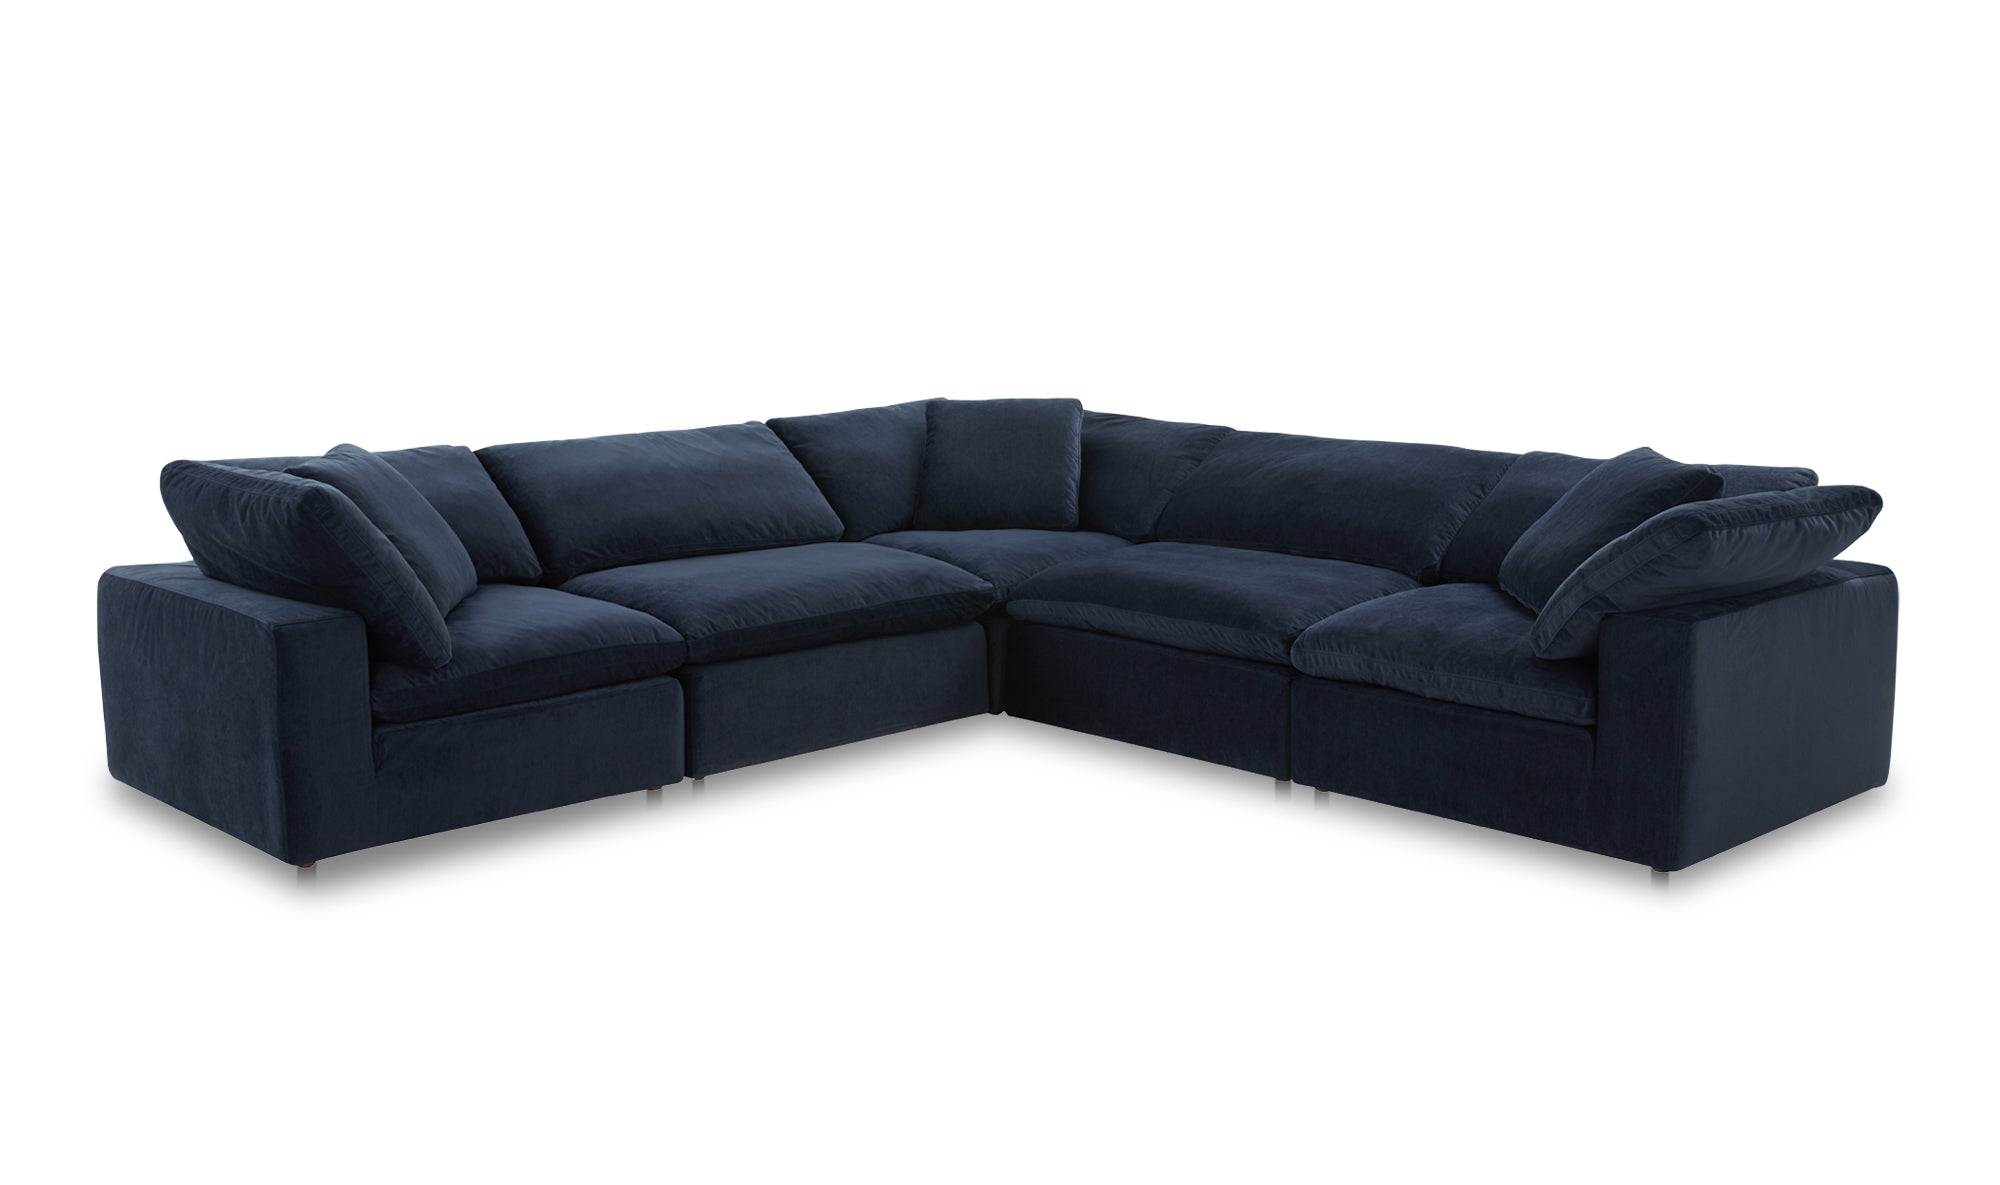 Clay Classic L Modular Sectional Performance Fabric - Nocturnal Sky